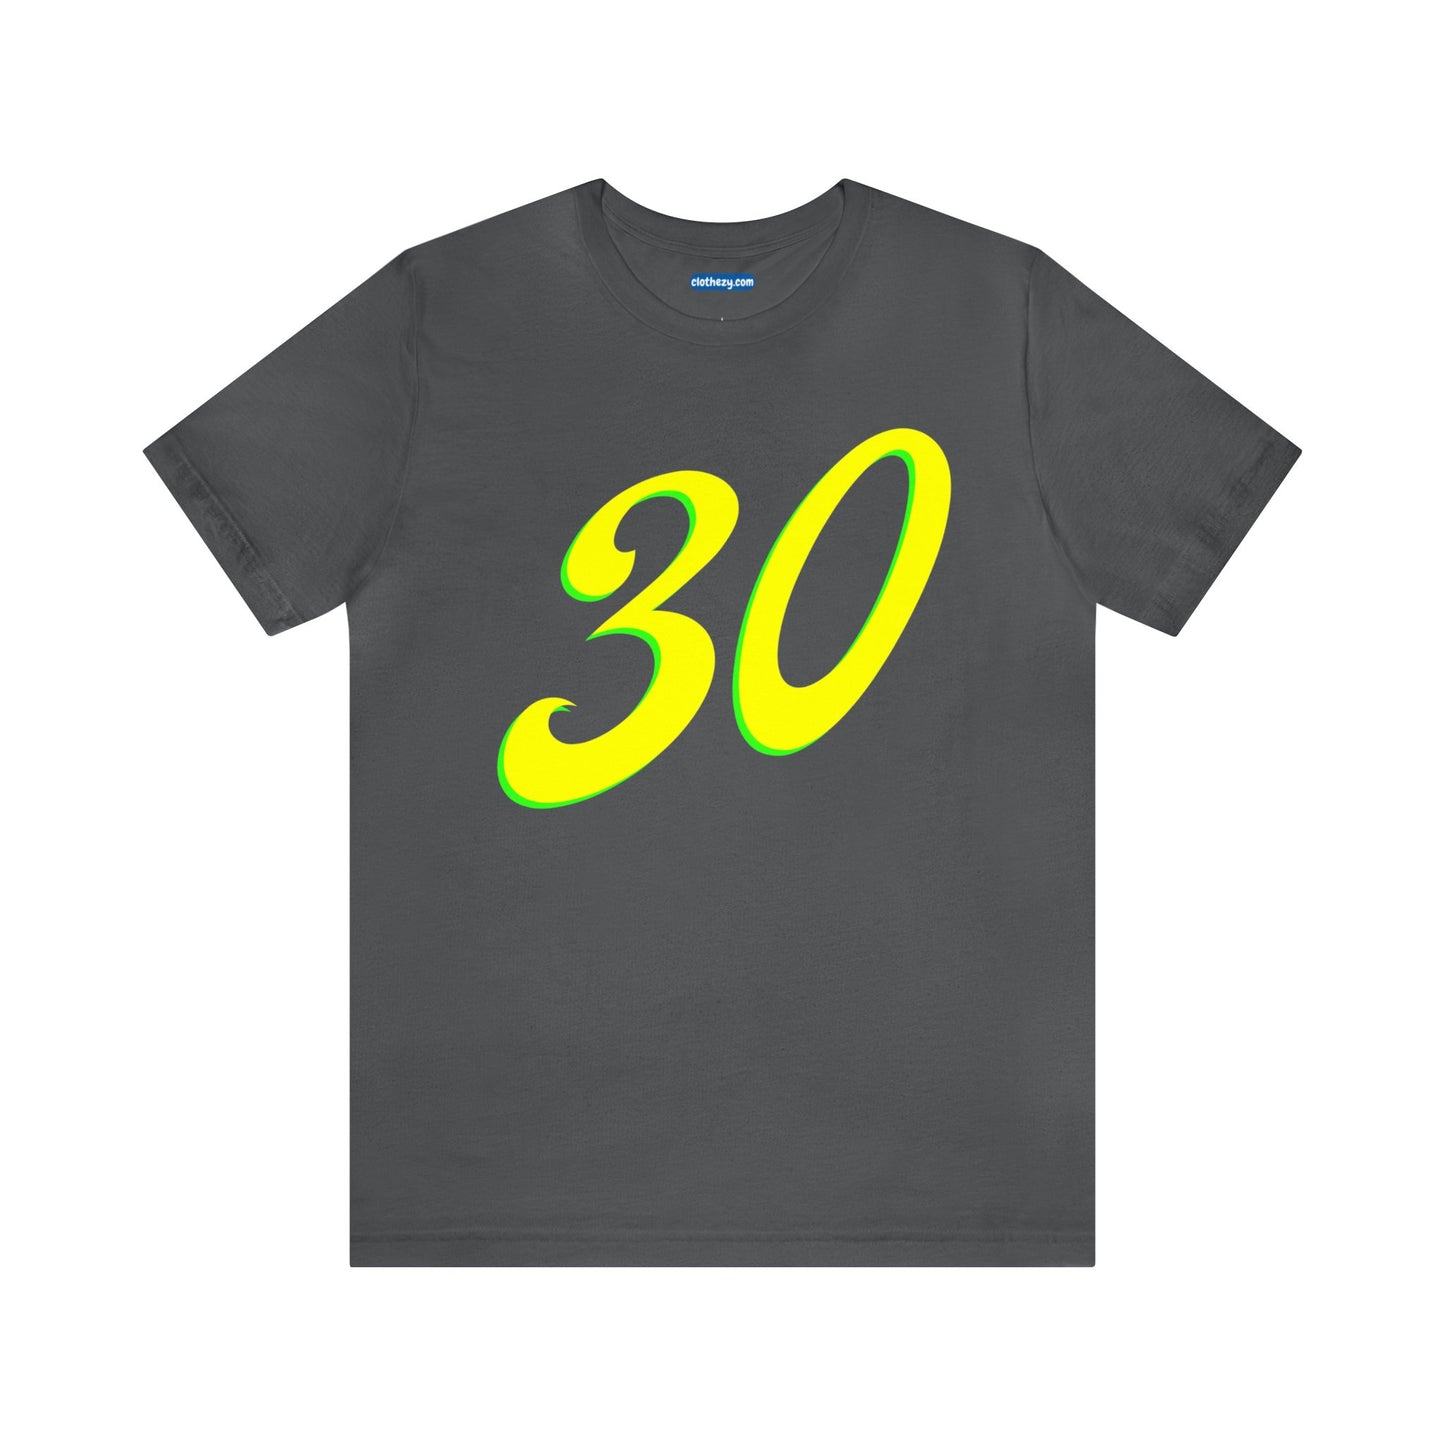 Number 30 Design - Soft Cotton Tee for birthdays and celebrations, Gift for friends and family, Multiple Options by clothezy.com in Black Size Small - Buy Now